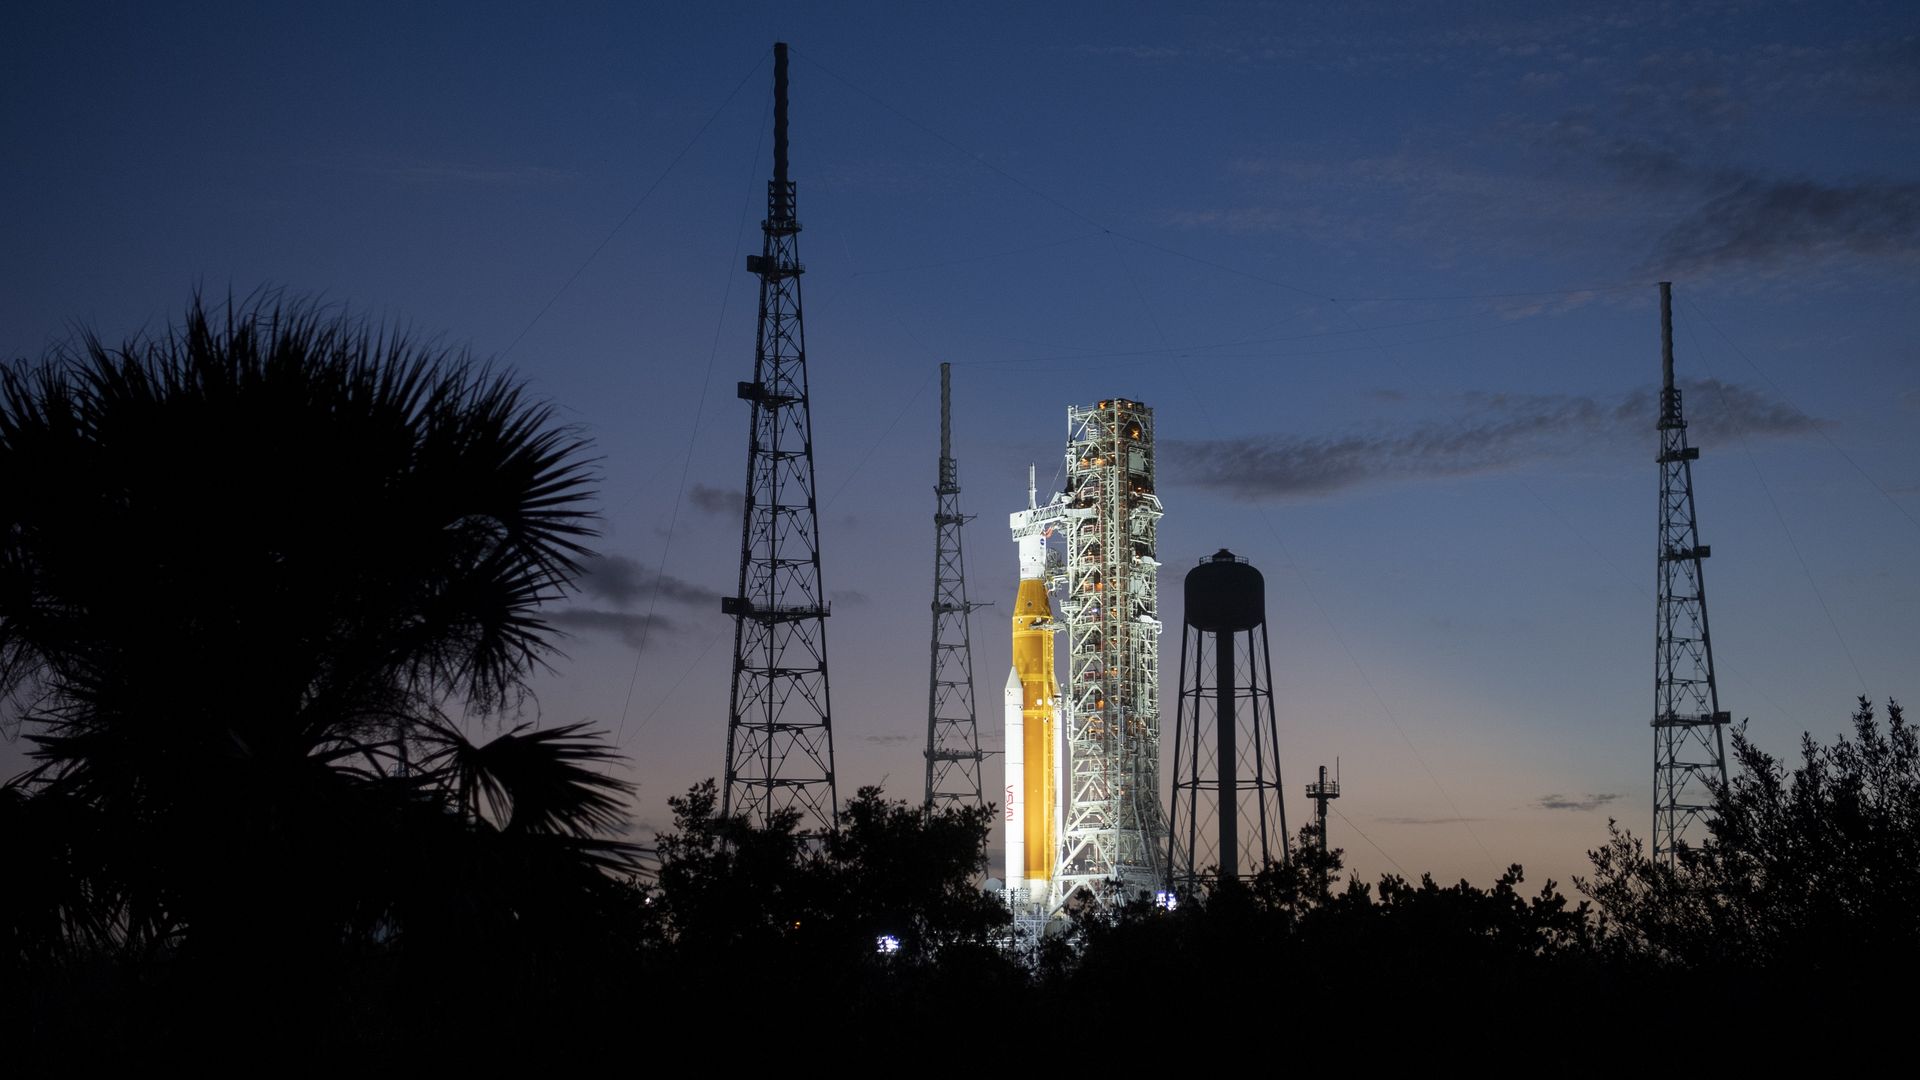 NASA's Space Launch System (SLS) rocket with the Orion spacecraft aboard is illuminated by spotlights.